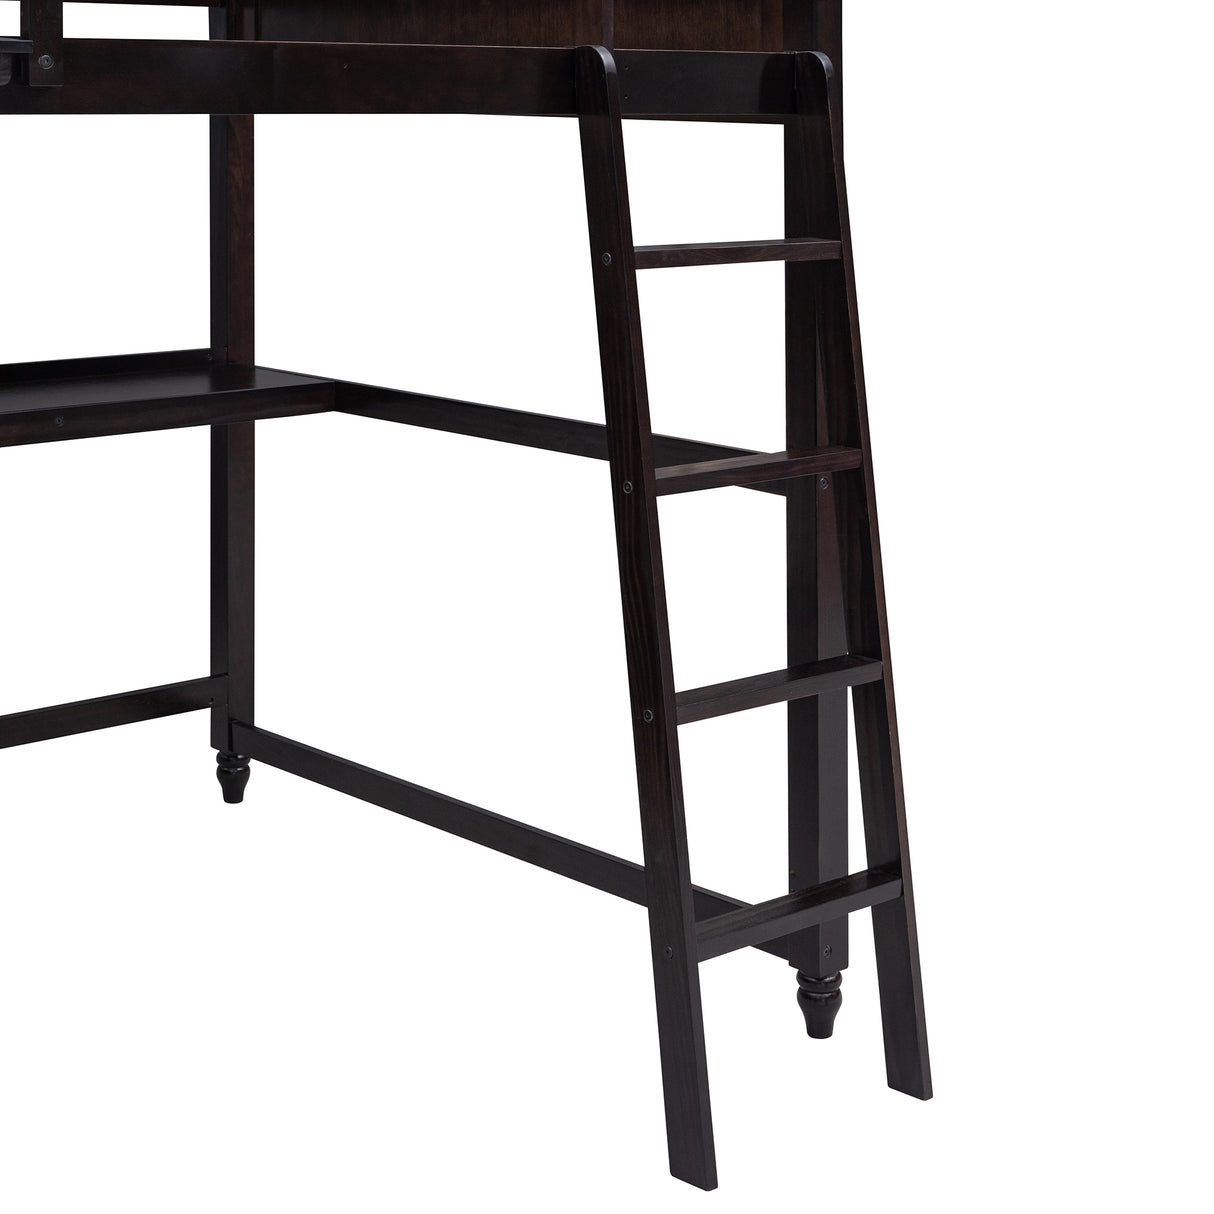 Full size Loft Bed with Drawers and Desk, Wooden Loft Bed with Shelves - Espresso(OLD SKU:LT000529AAP) Home Elegance USA